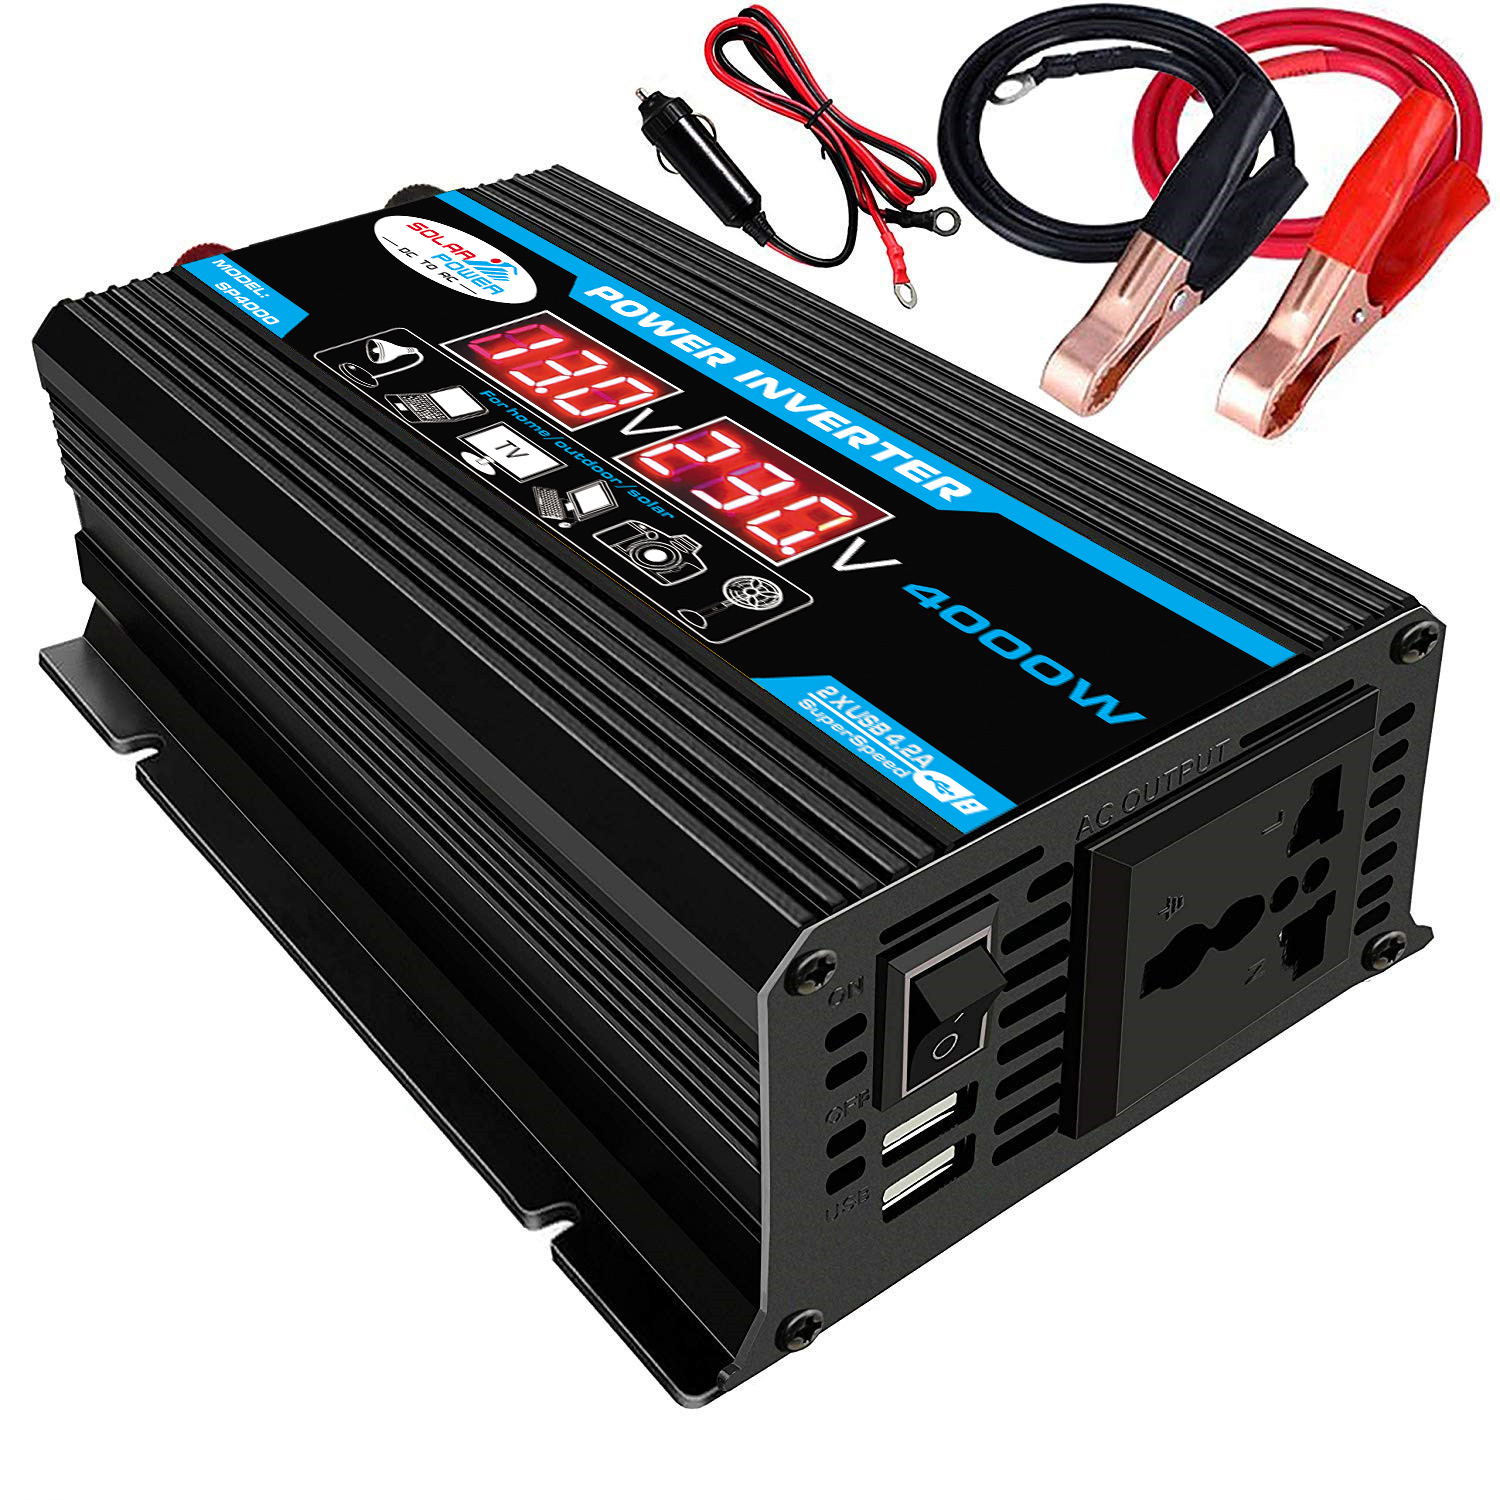 

4000W Peak Car Power Inverter 12V-220V/110V Modified Sine Wave Converter with LCD Screen Dual USB 8 Safety Protection Balck